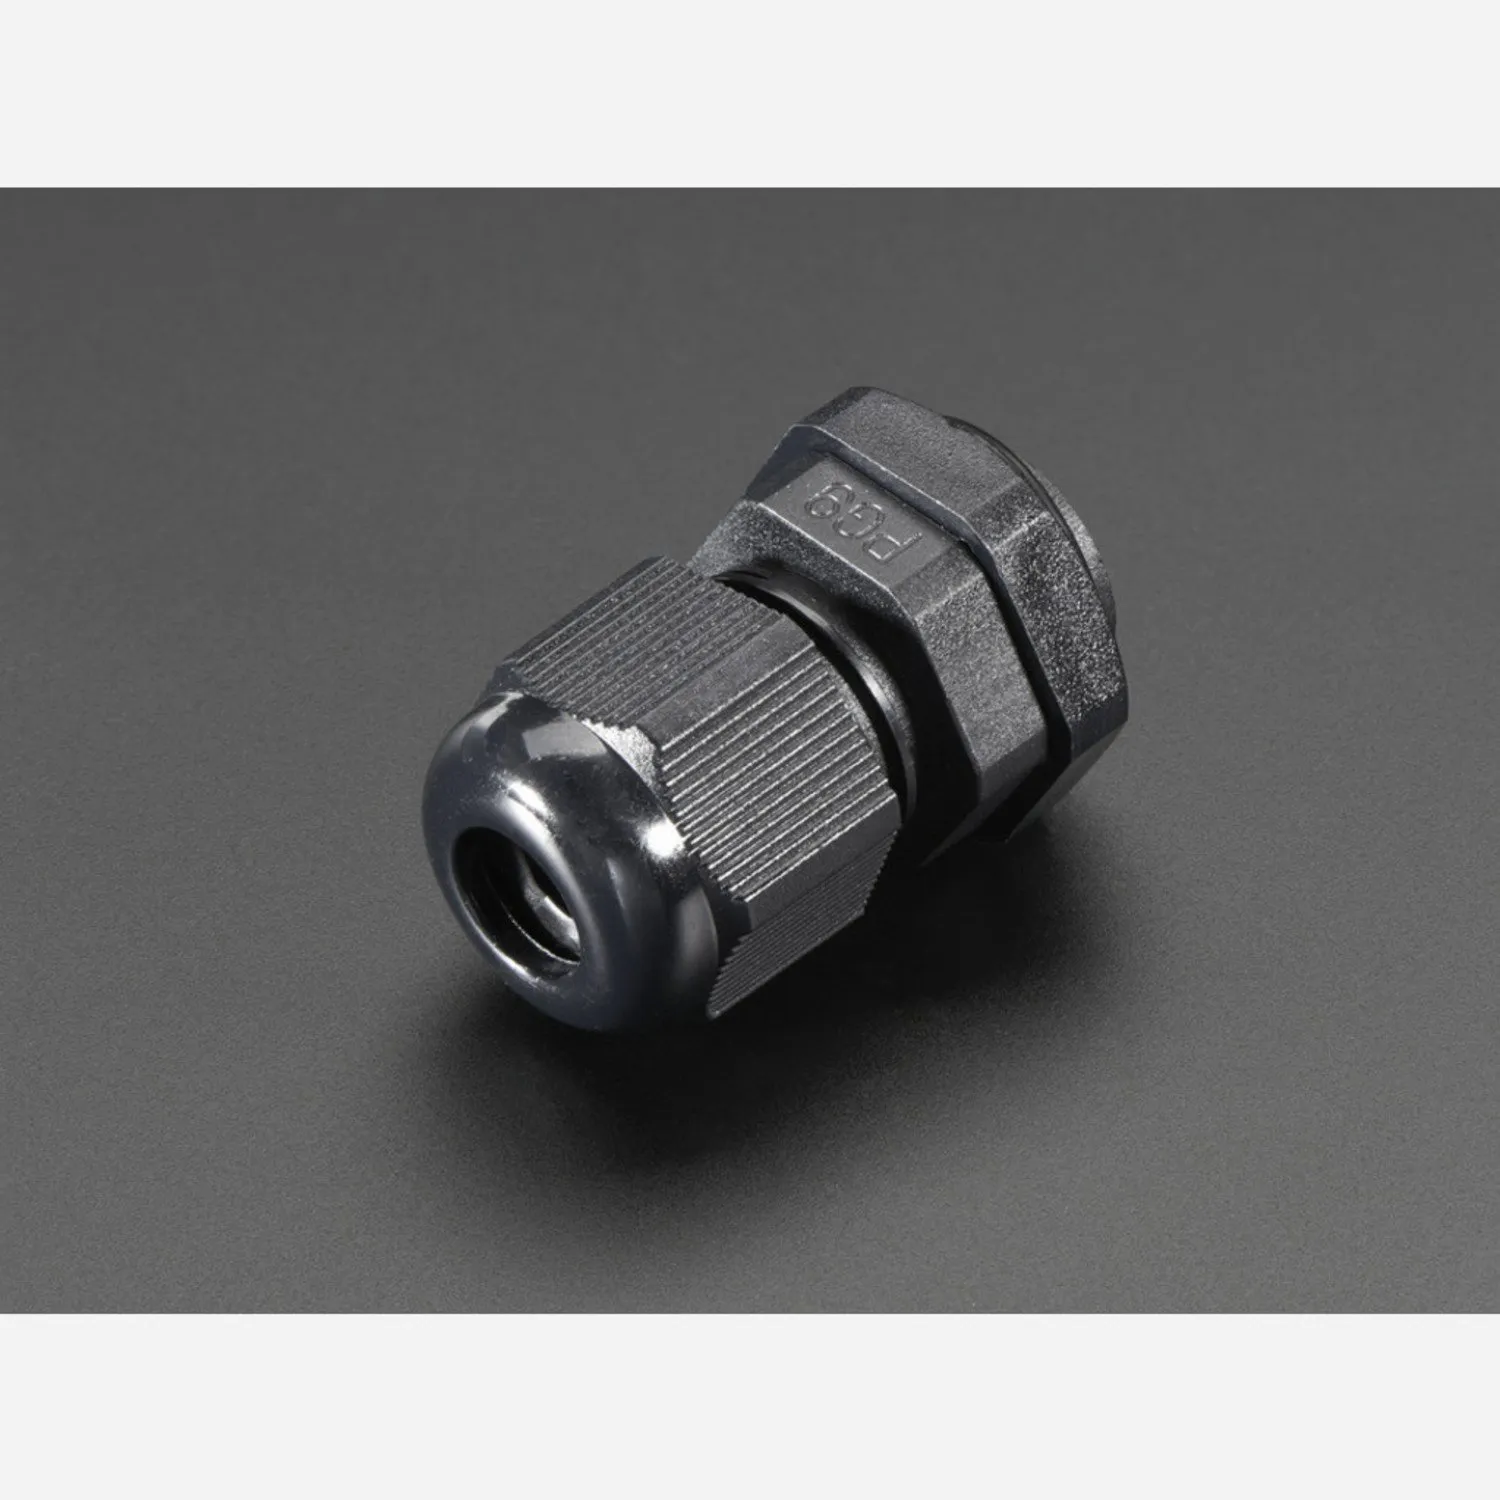 Photo of Cable Gland PG-9 size - 0.158 to 0.252 Cable Diameter [PG-9]